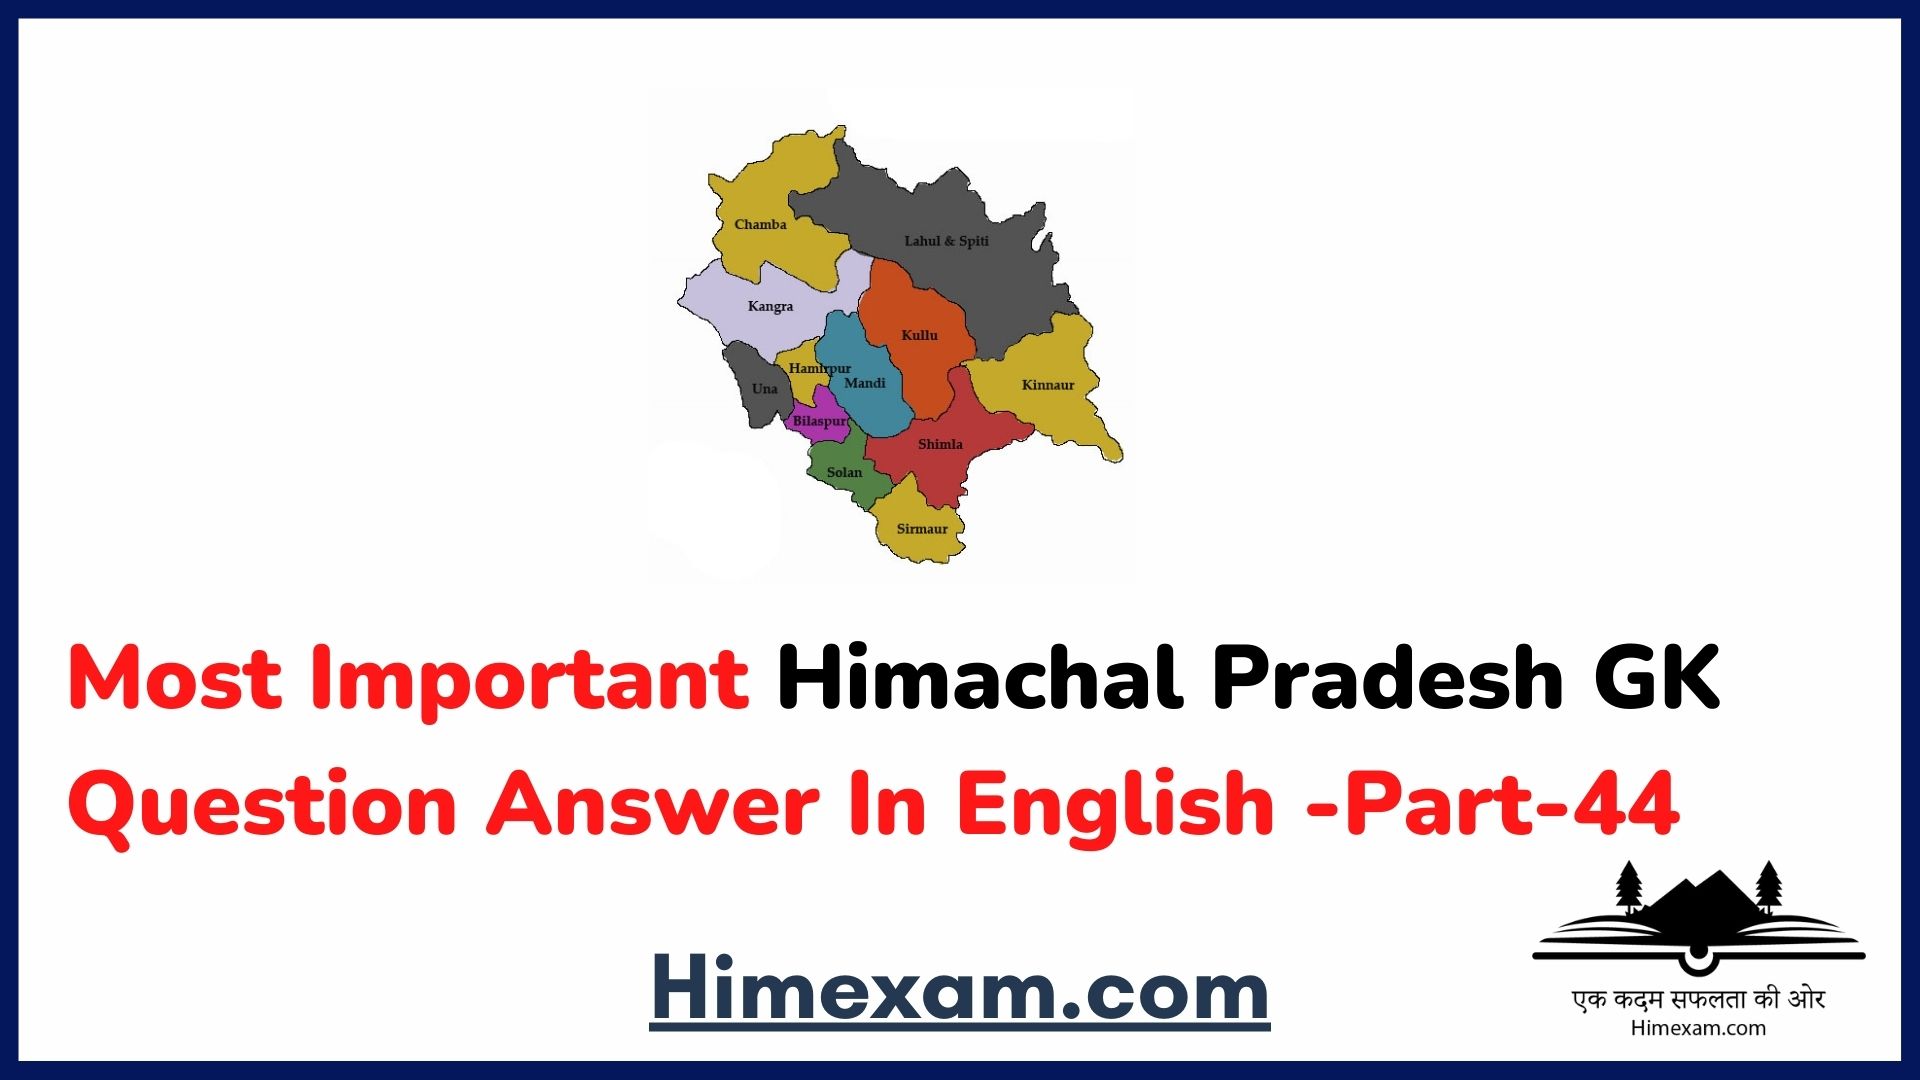 Most Important Himachal Pradesh GK Question Answer In English -Part-44